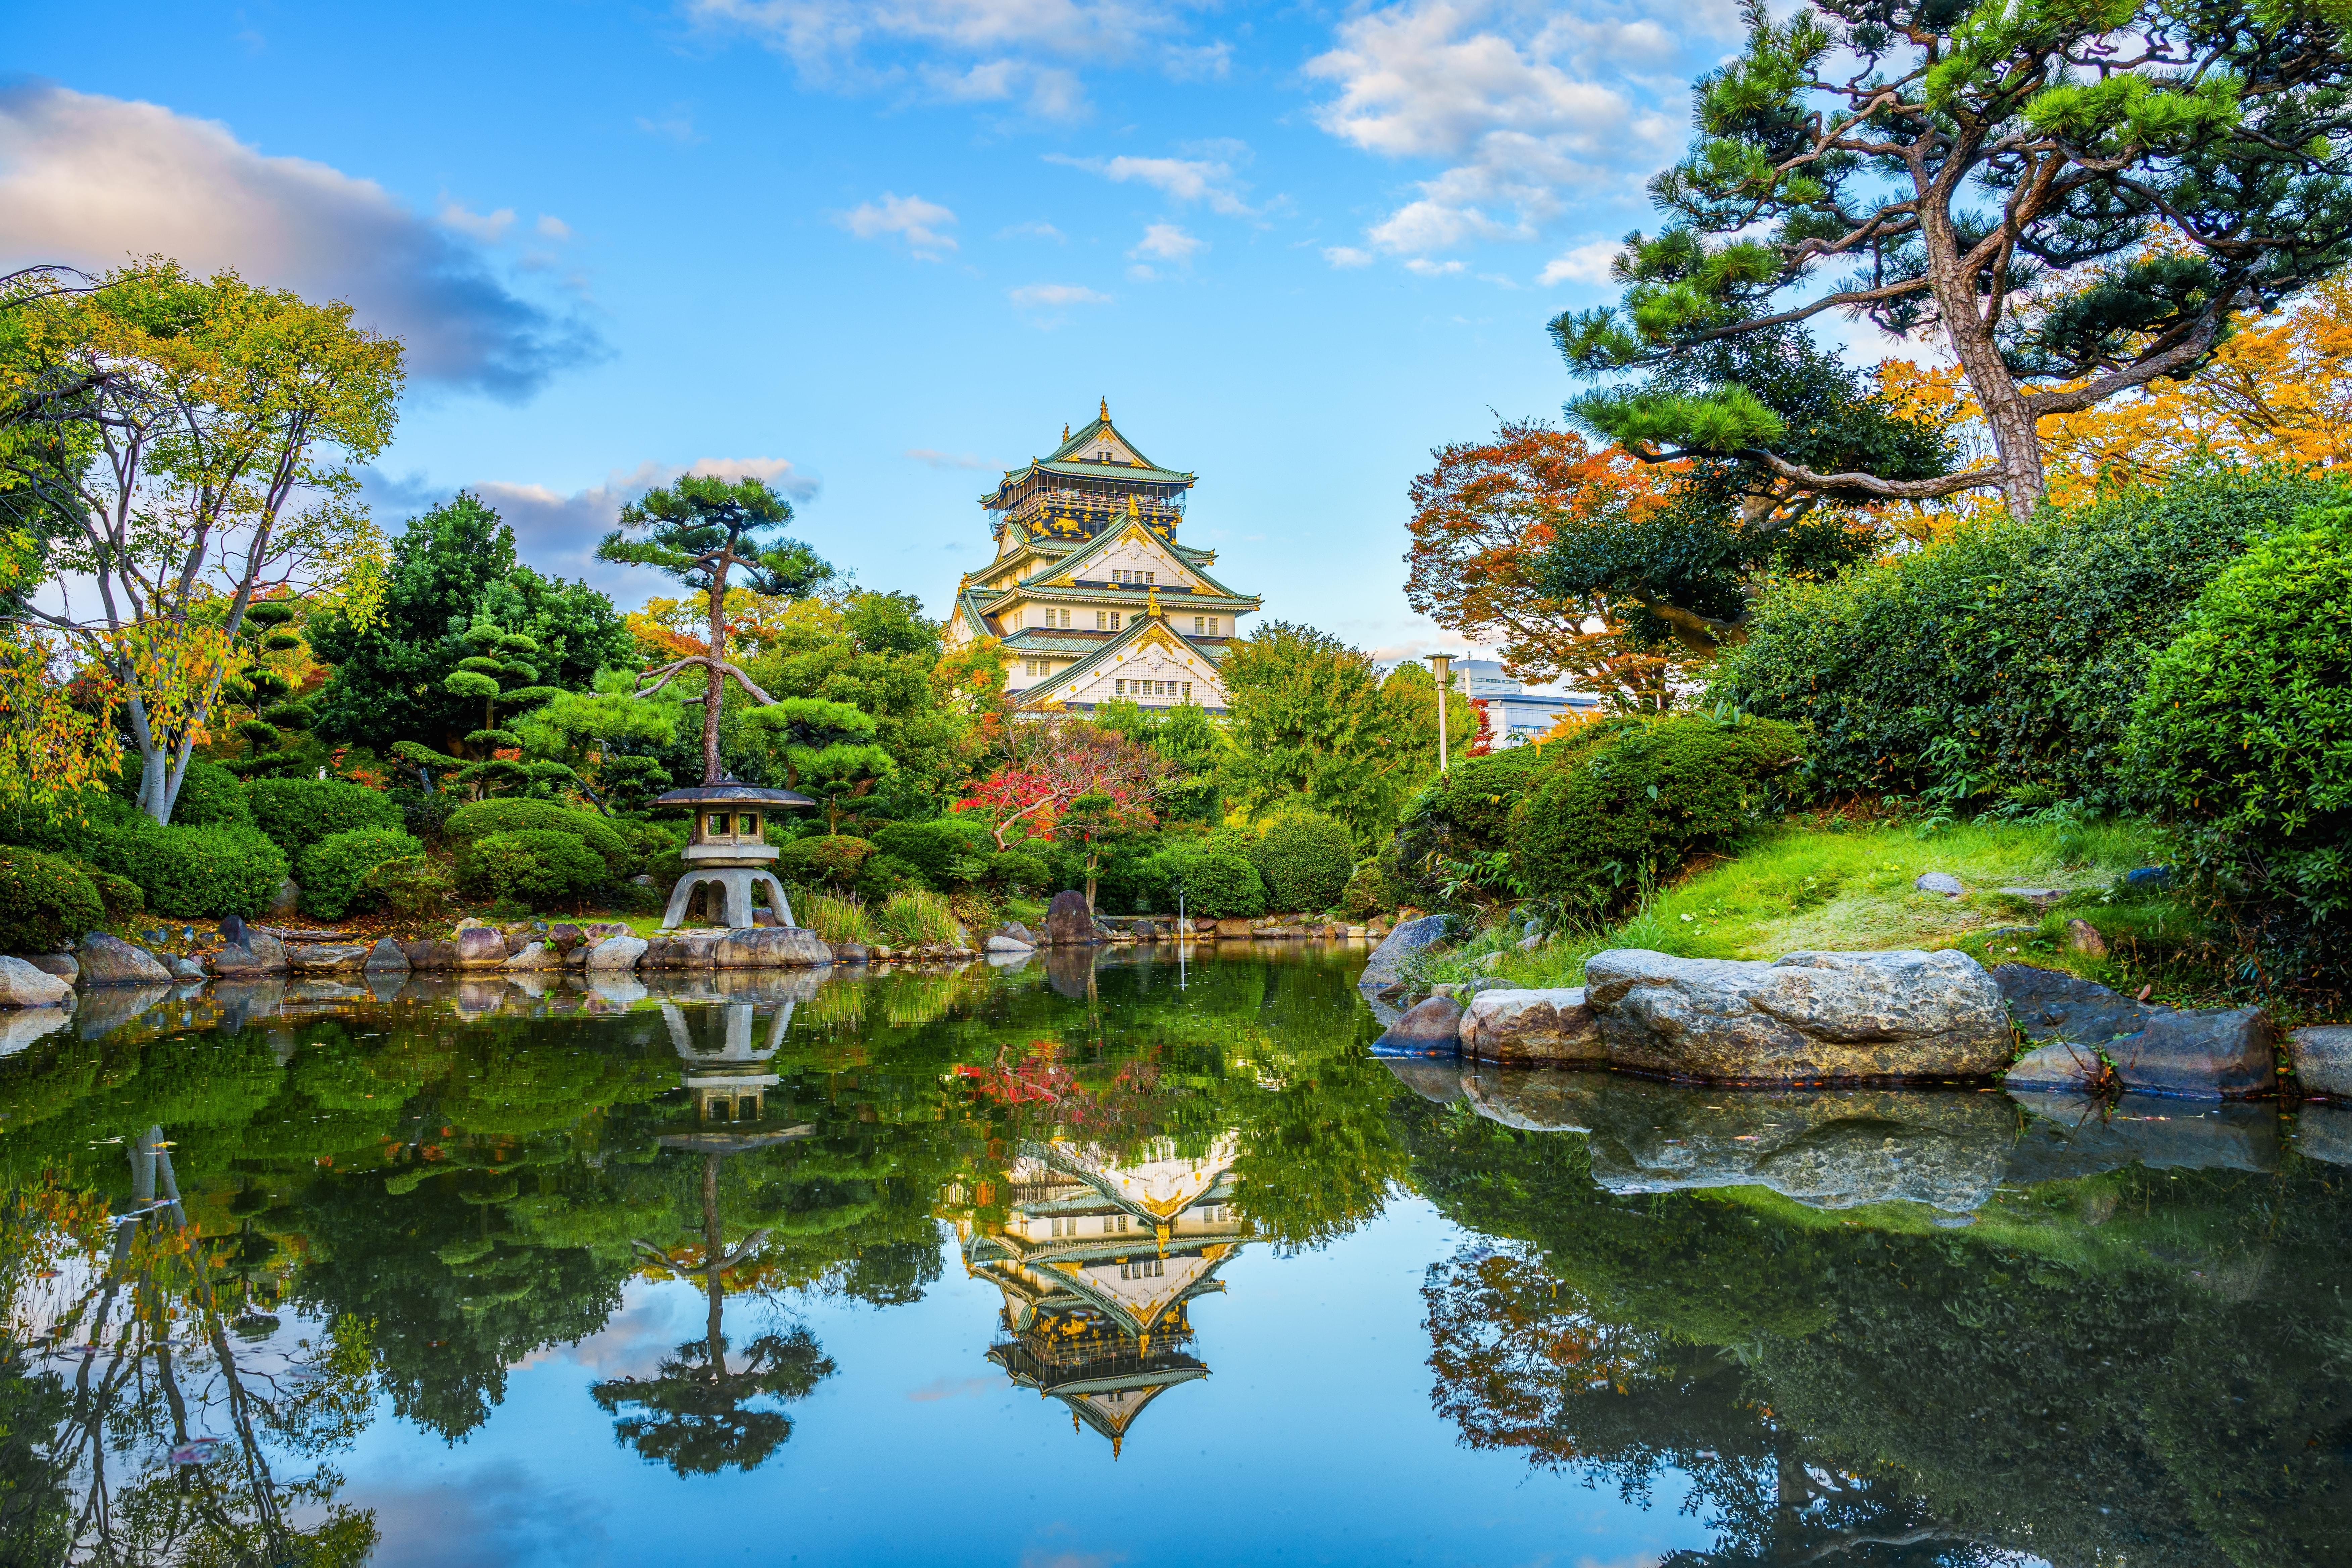 Osaka Packages from Guwahati | Get Upto 50% Off